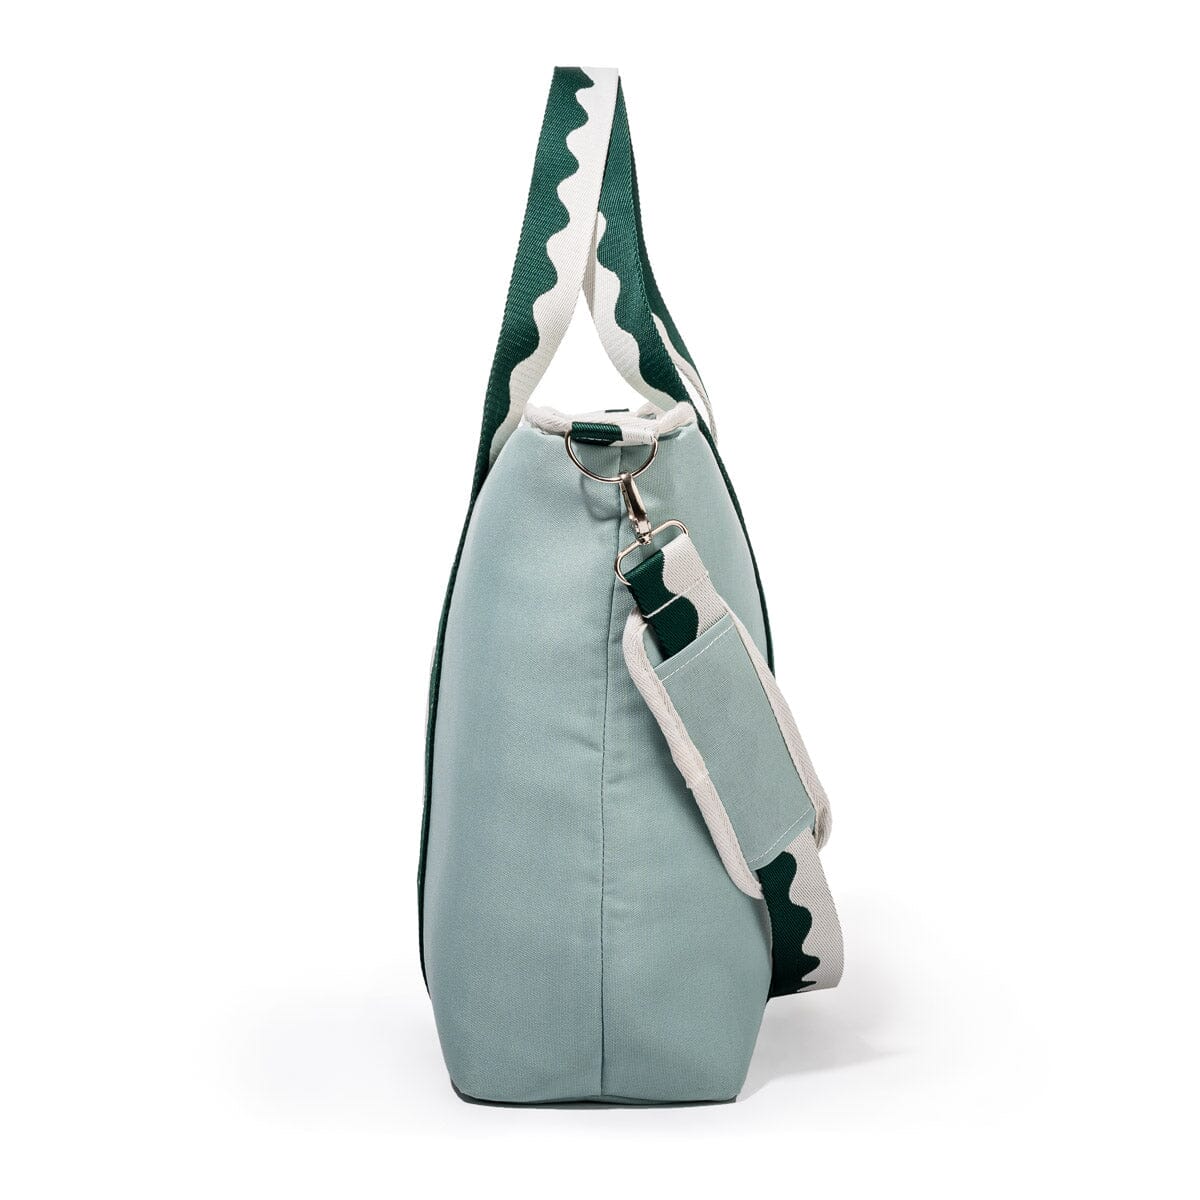 The Cooler Tote Bag - Rivie Green Cooler Tote Business & Pleasure Co. 